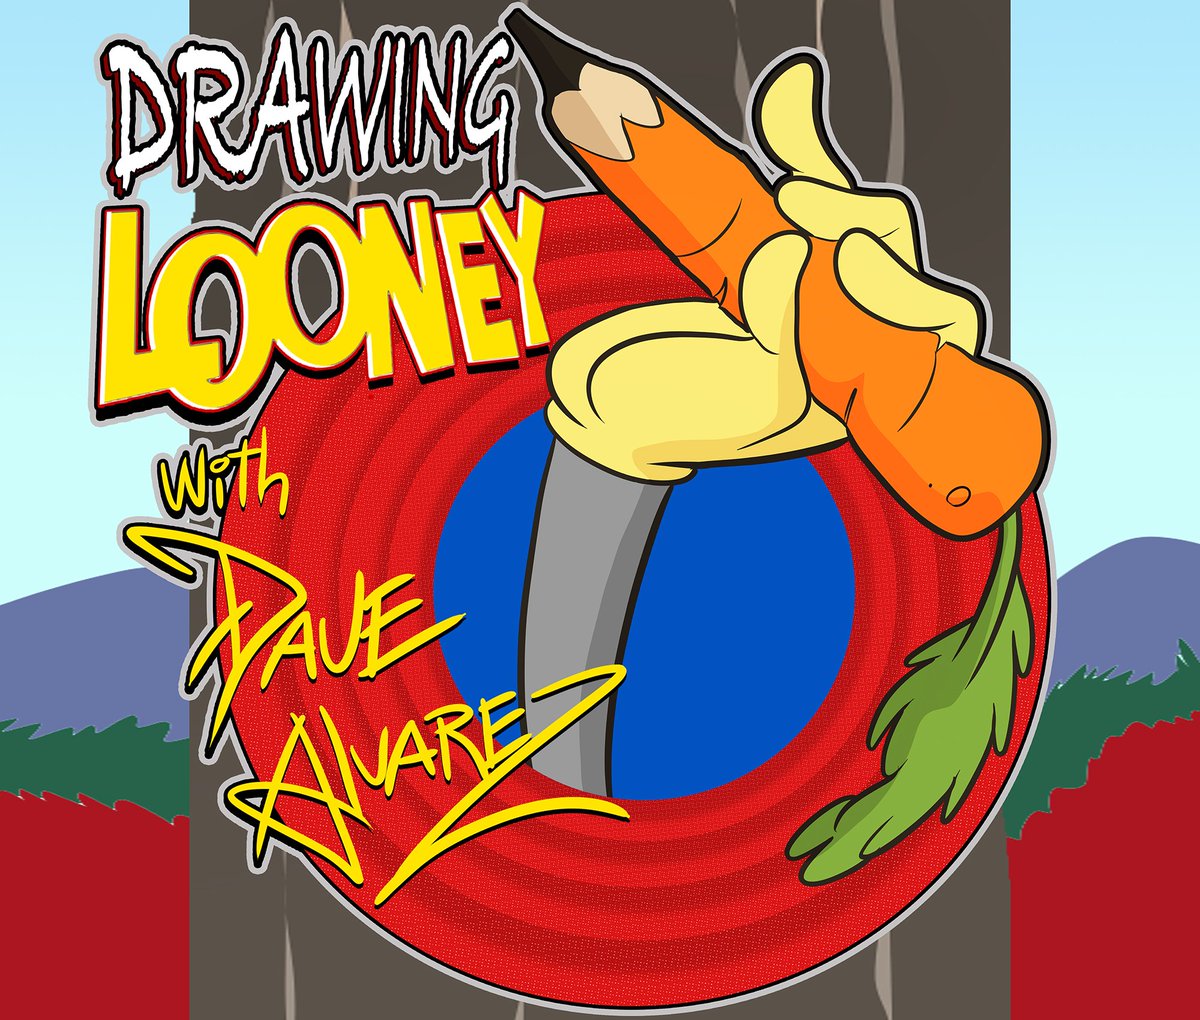 This is something that you guys have been asking for, so I'll do it this one time. I'll teach you some tricks of the trade in what makes a cartoon 'LOONEY'! You can buy your space through this link: paypal.com/instantcommerc… Wednesday, May 1st at 2:00 PM Eastern Time.